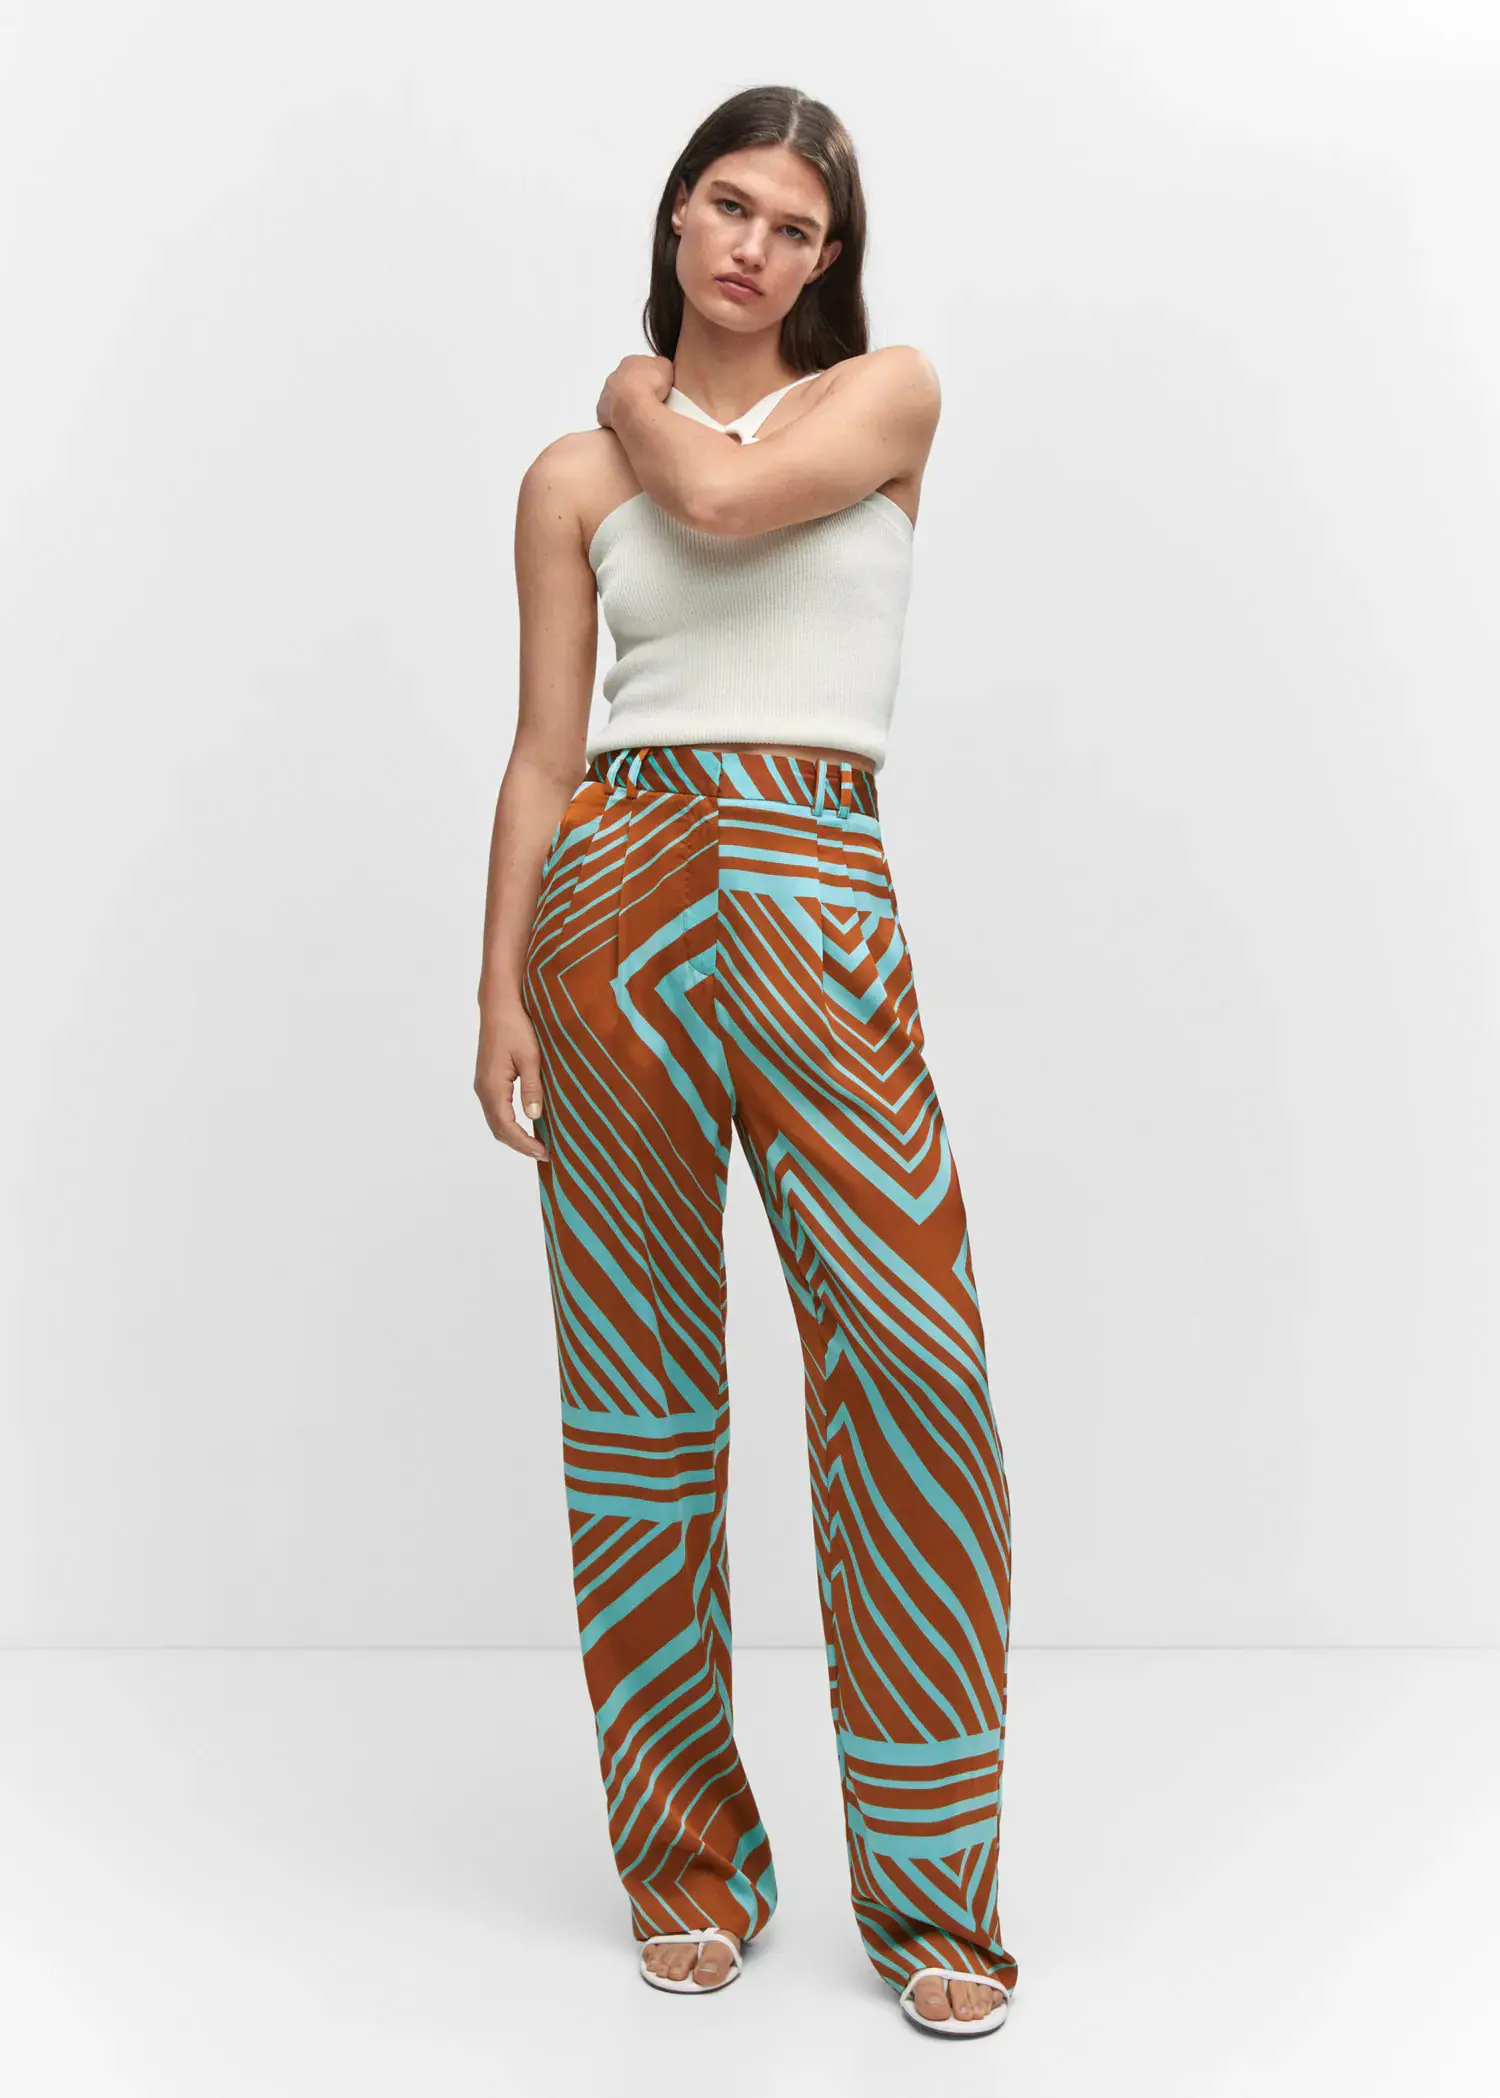 Mango Satin printed pants. a woman in a white top and brown and blue patterned pants. 